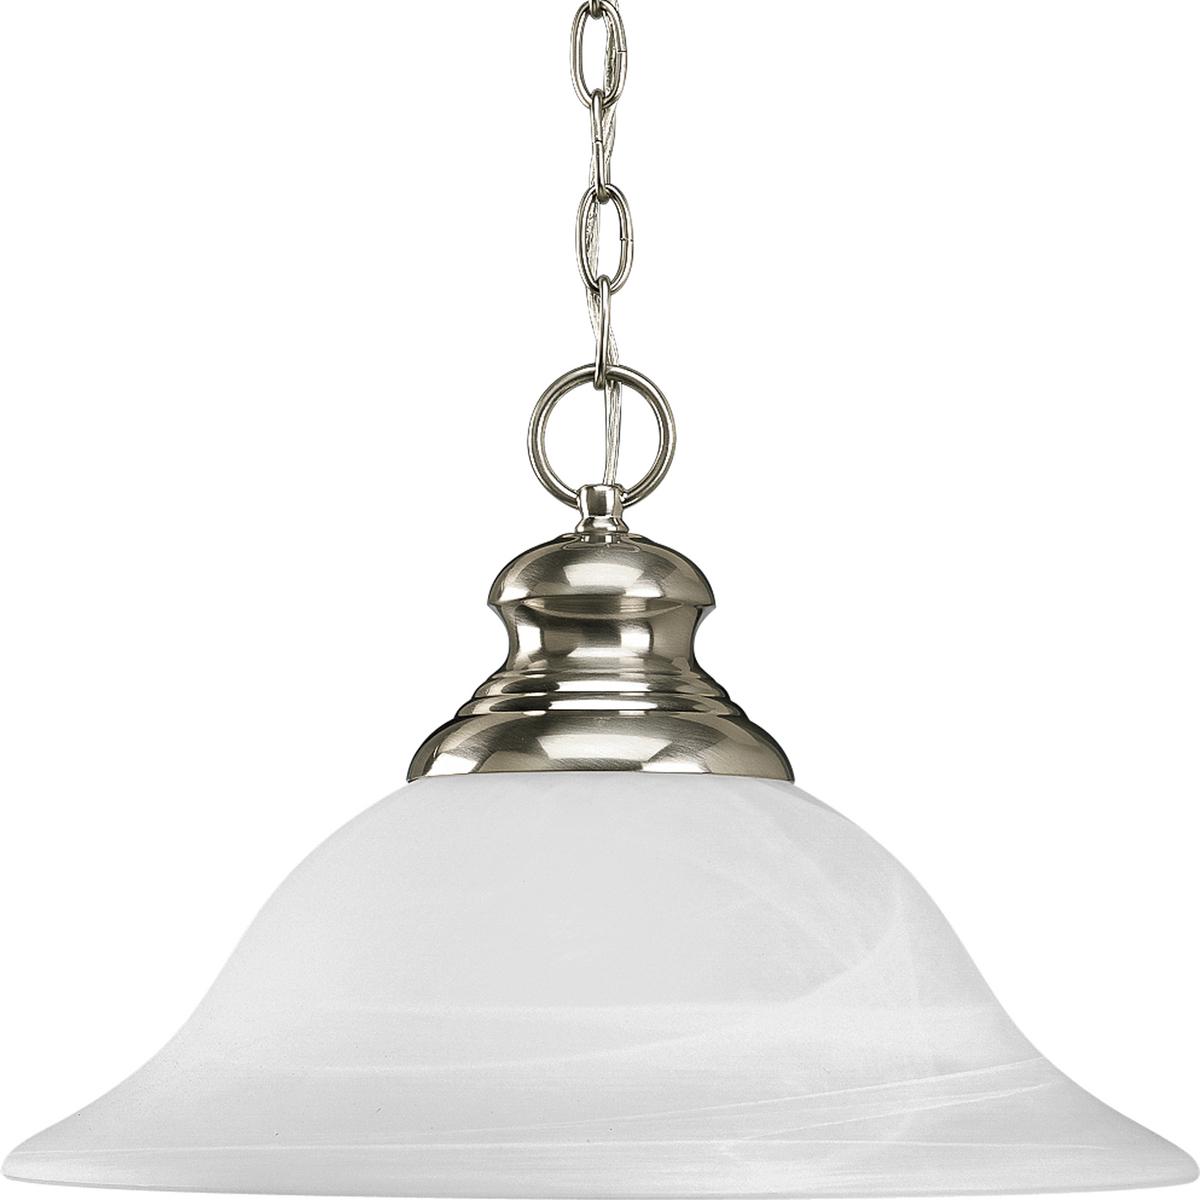 Hubbell P5090-09 One-light pendant with etched alabaster style glass from the Bedford Collection features softly diffused alabaster glass shades on a finely crafted frame. Striking metallic finish adds richness and depth to the fixture. The style blends well with today's 